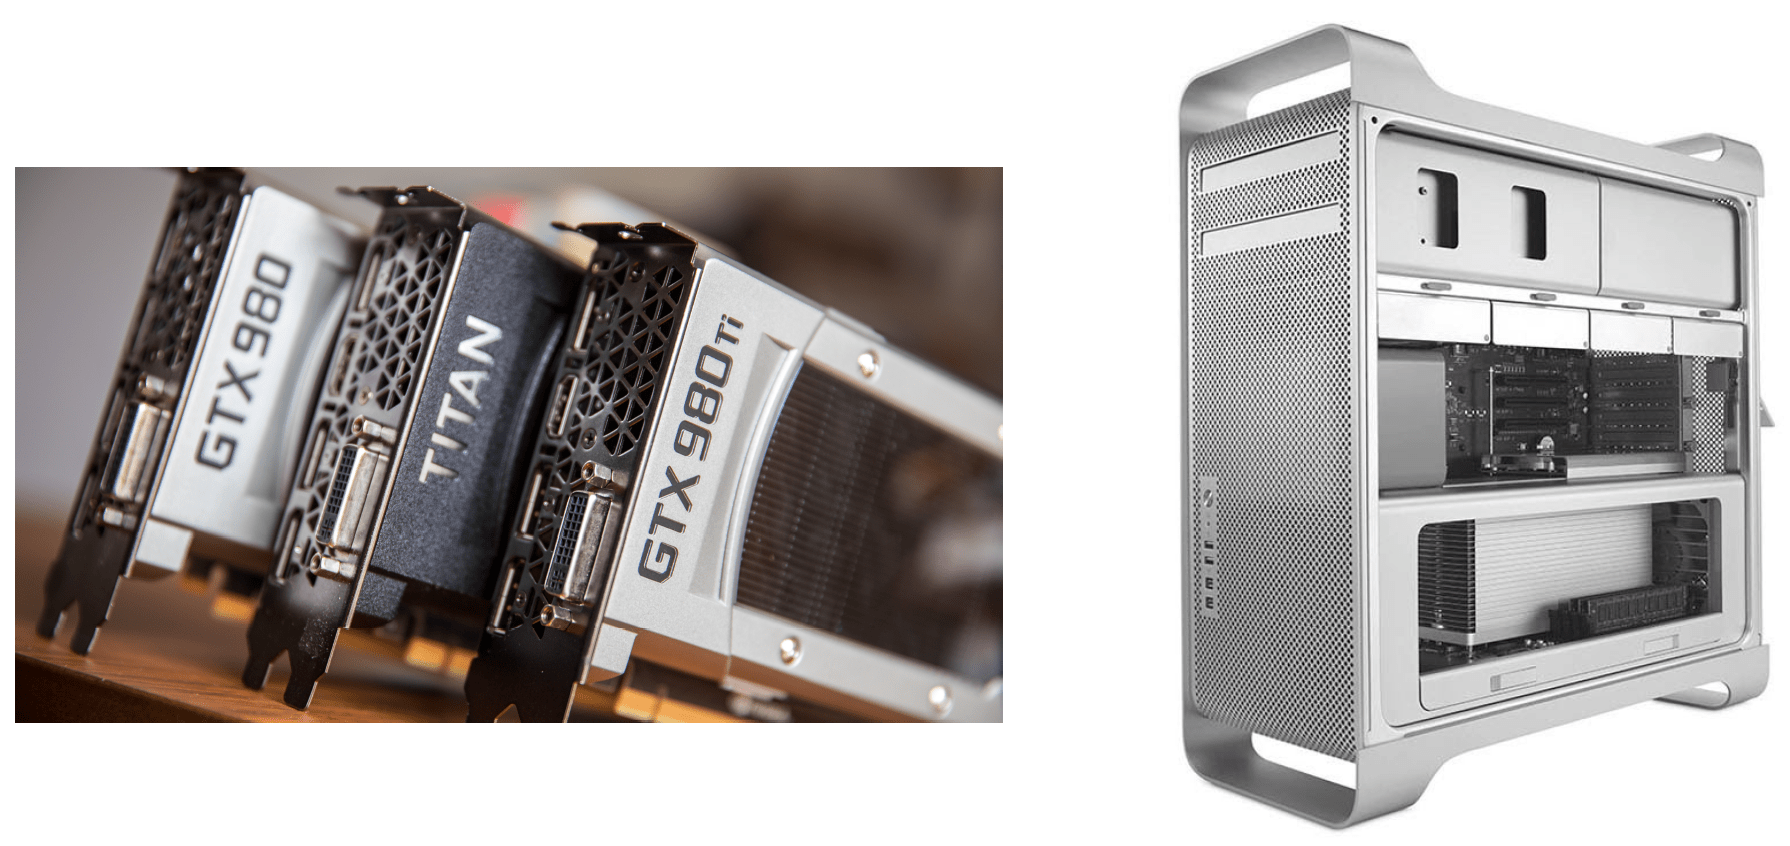 best video card for mac pro 5.1